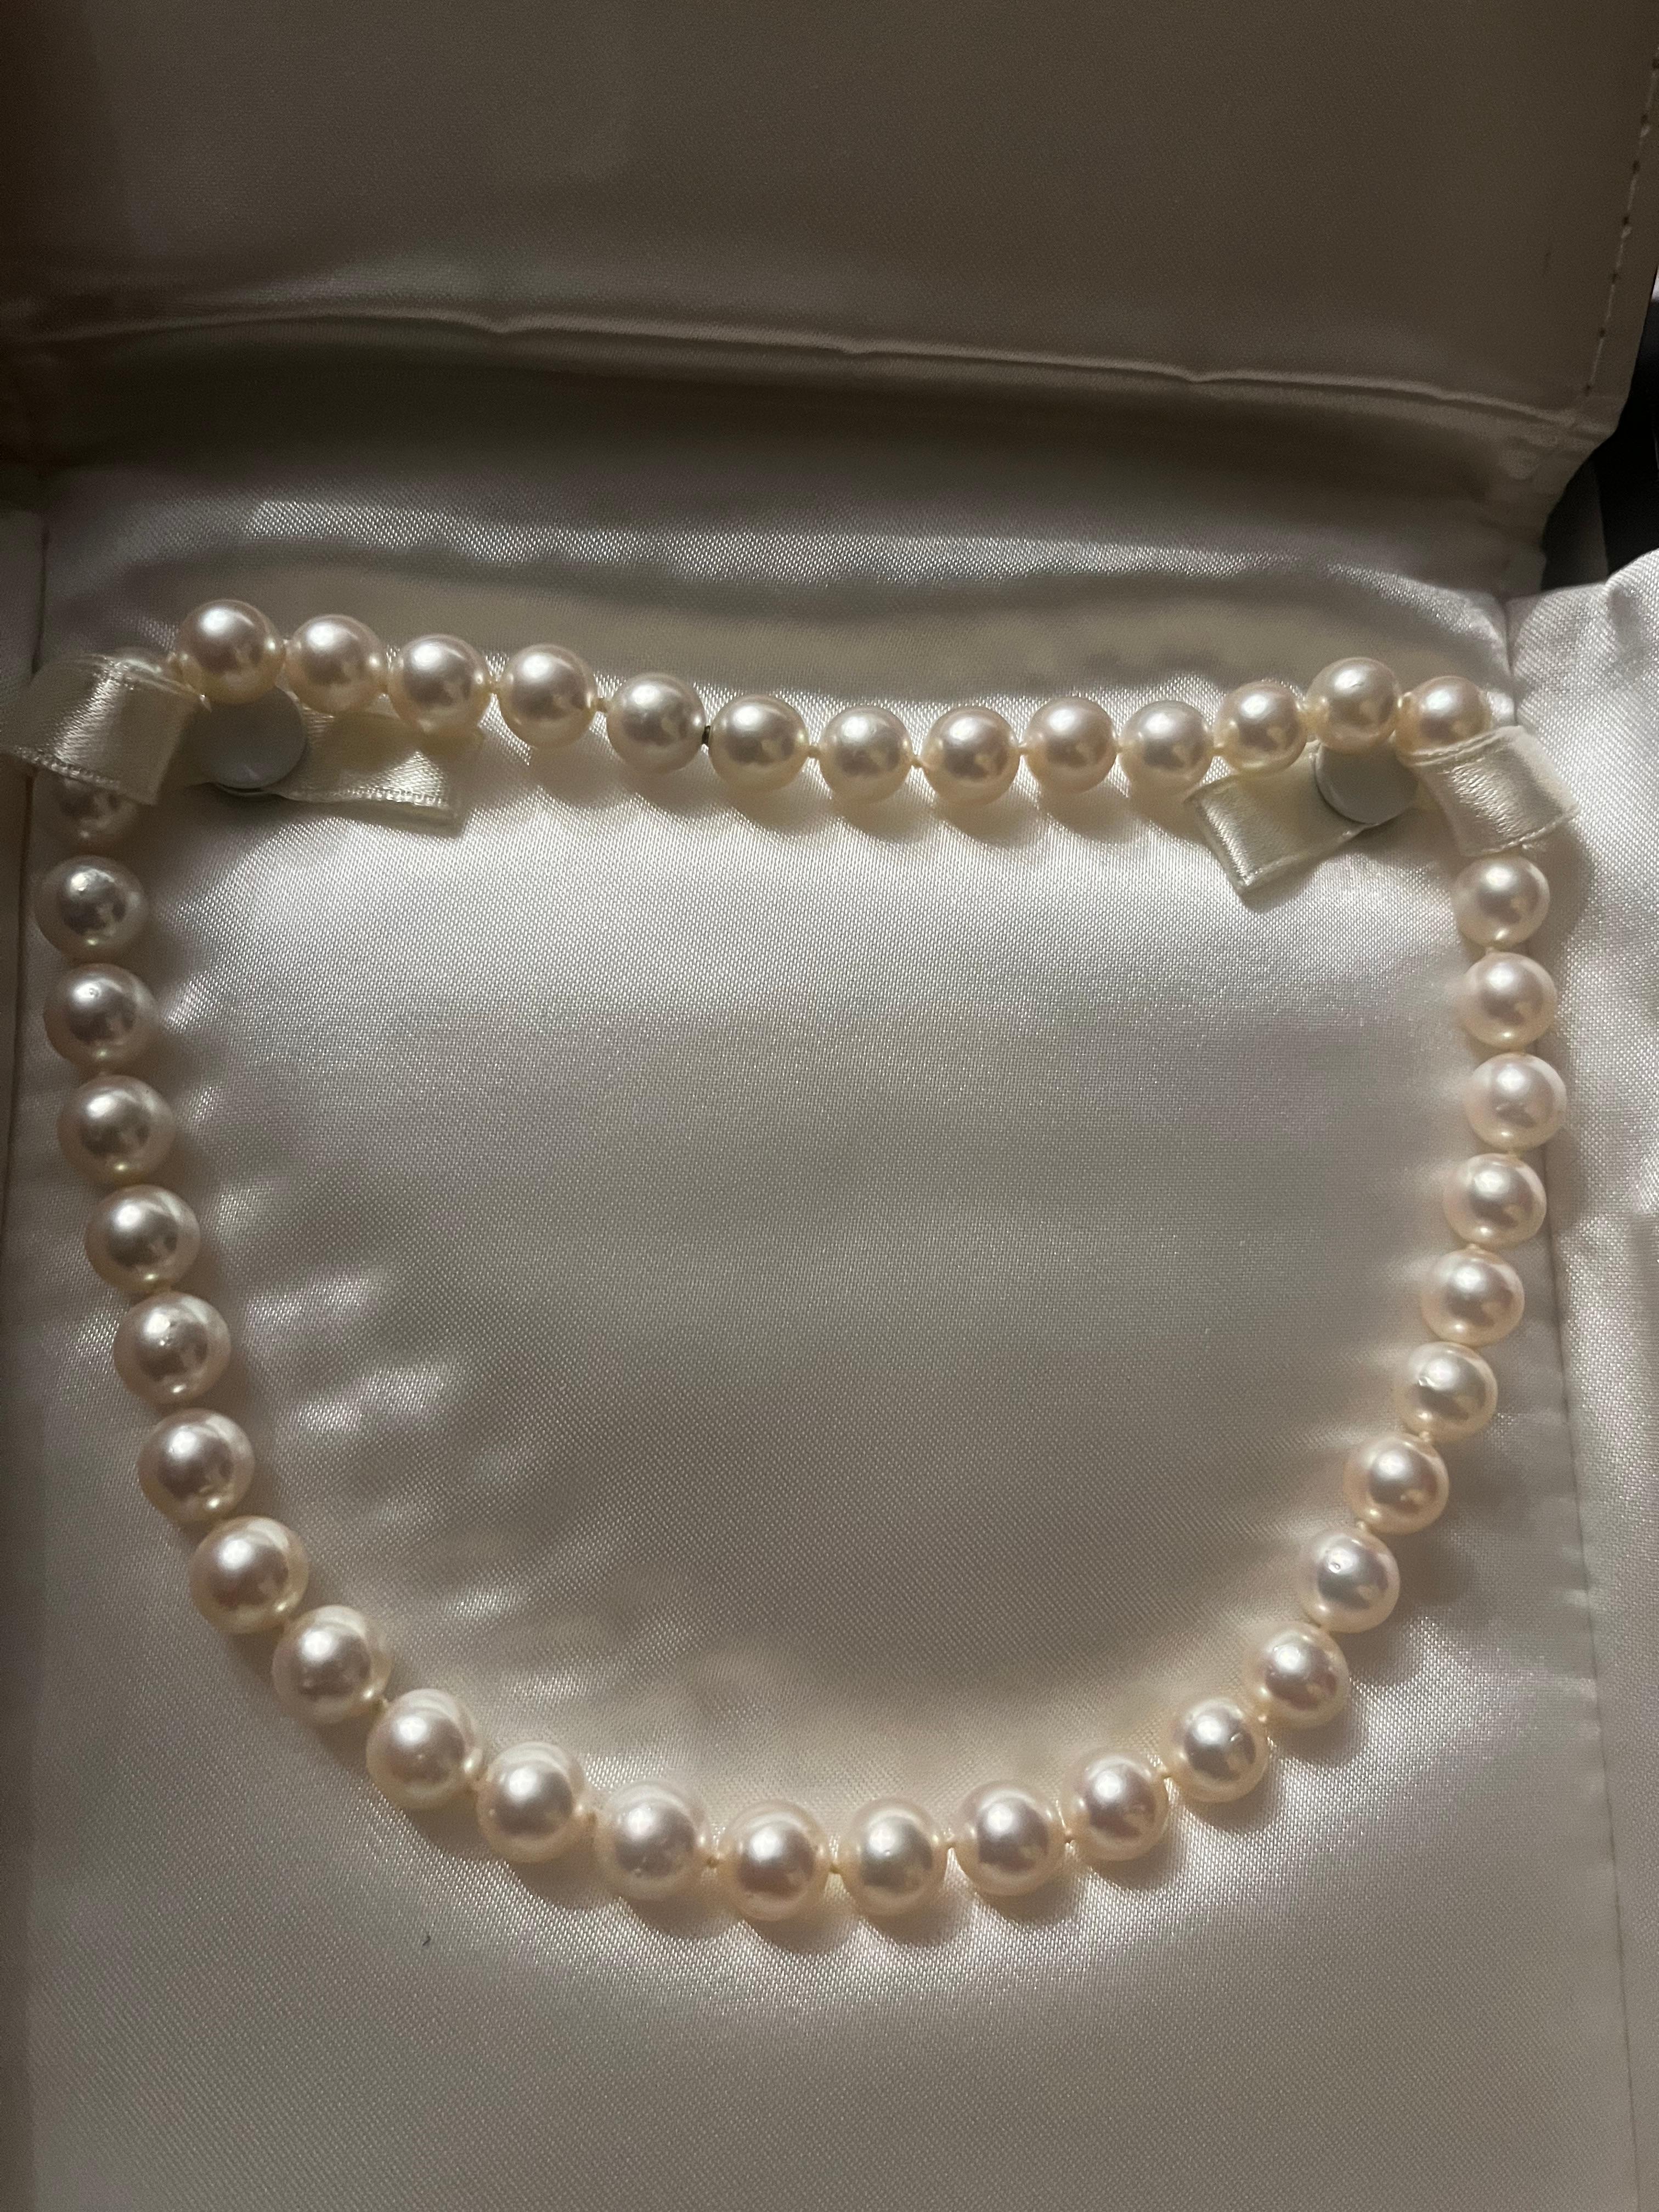 Bailey Banks and Biddle 15.”5 Cultured Pearls.